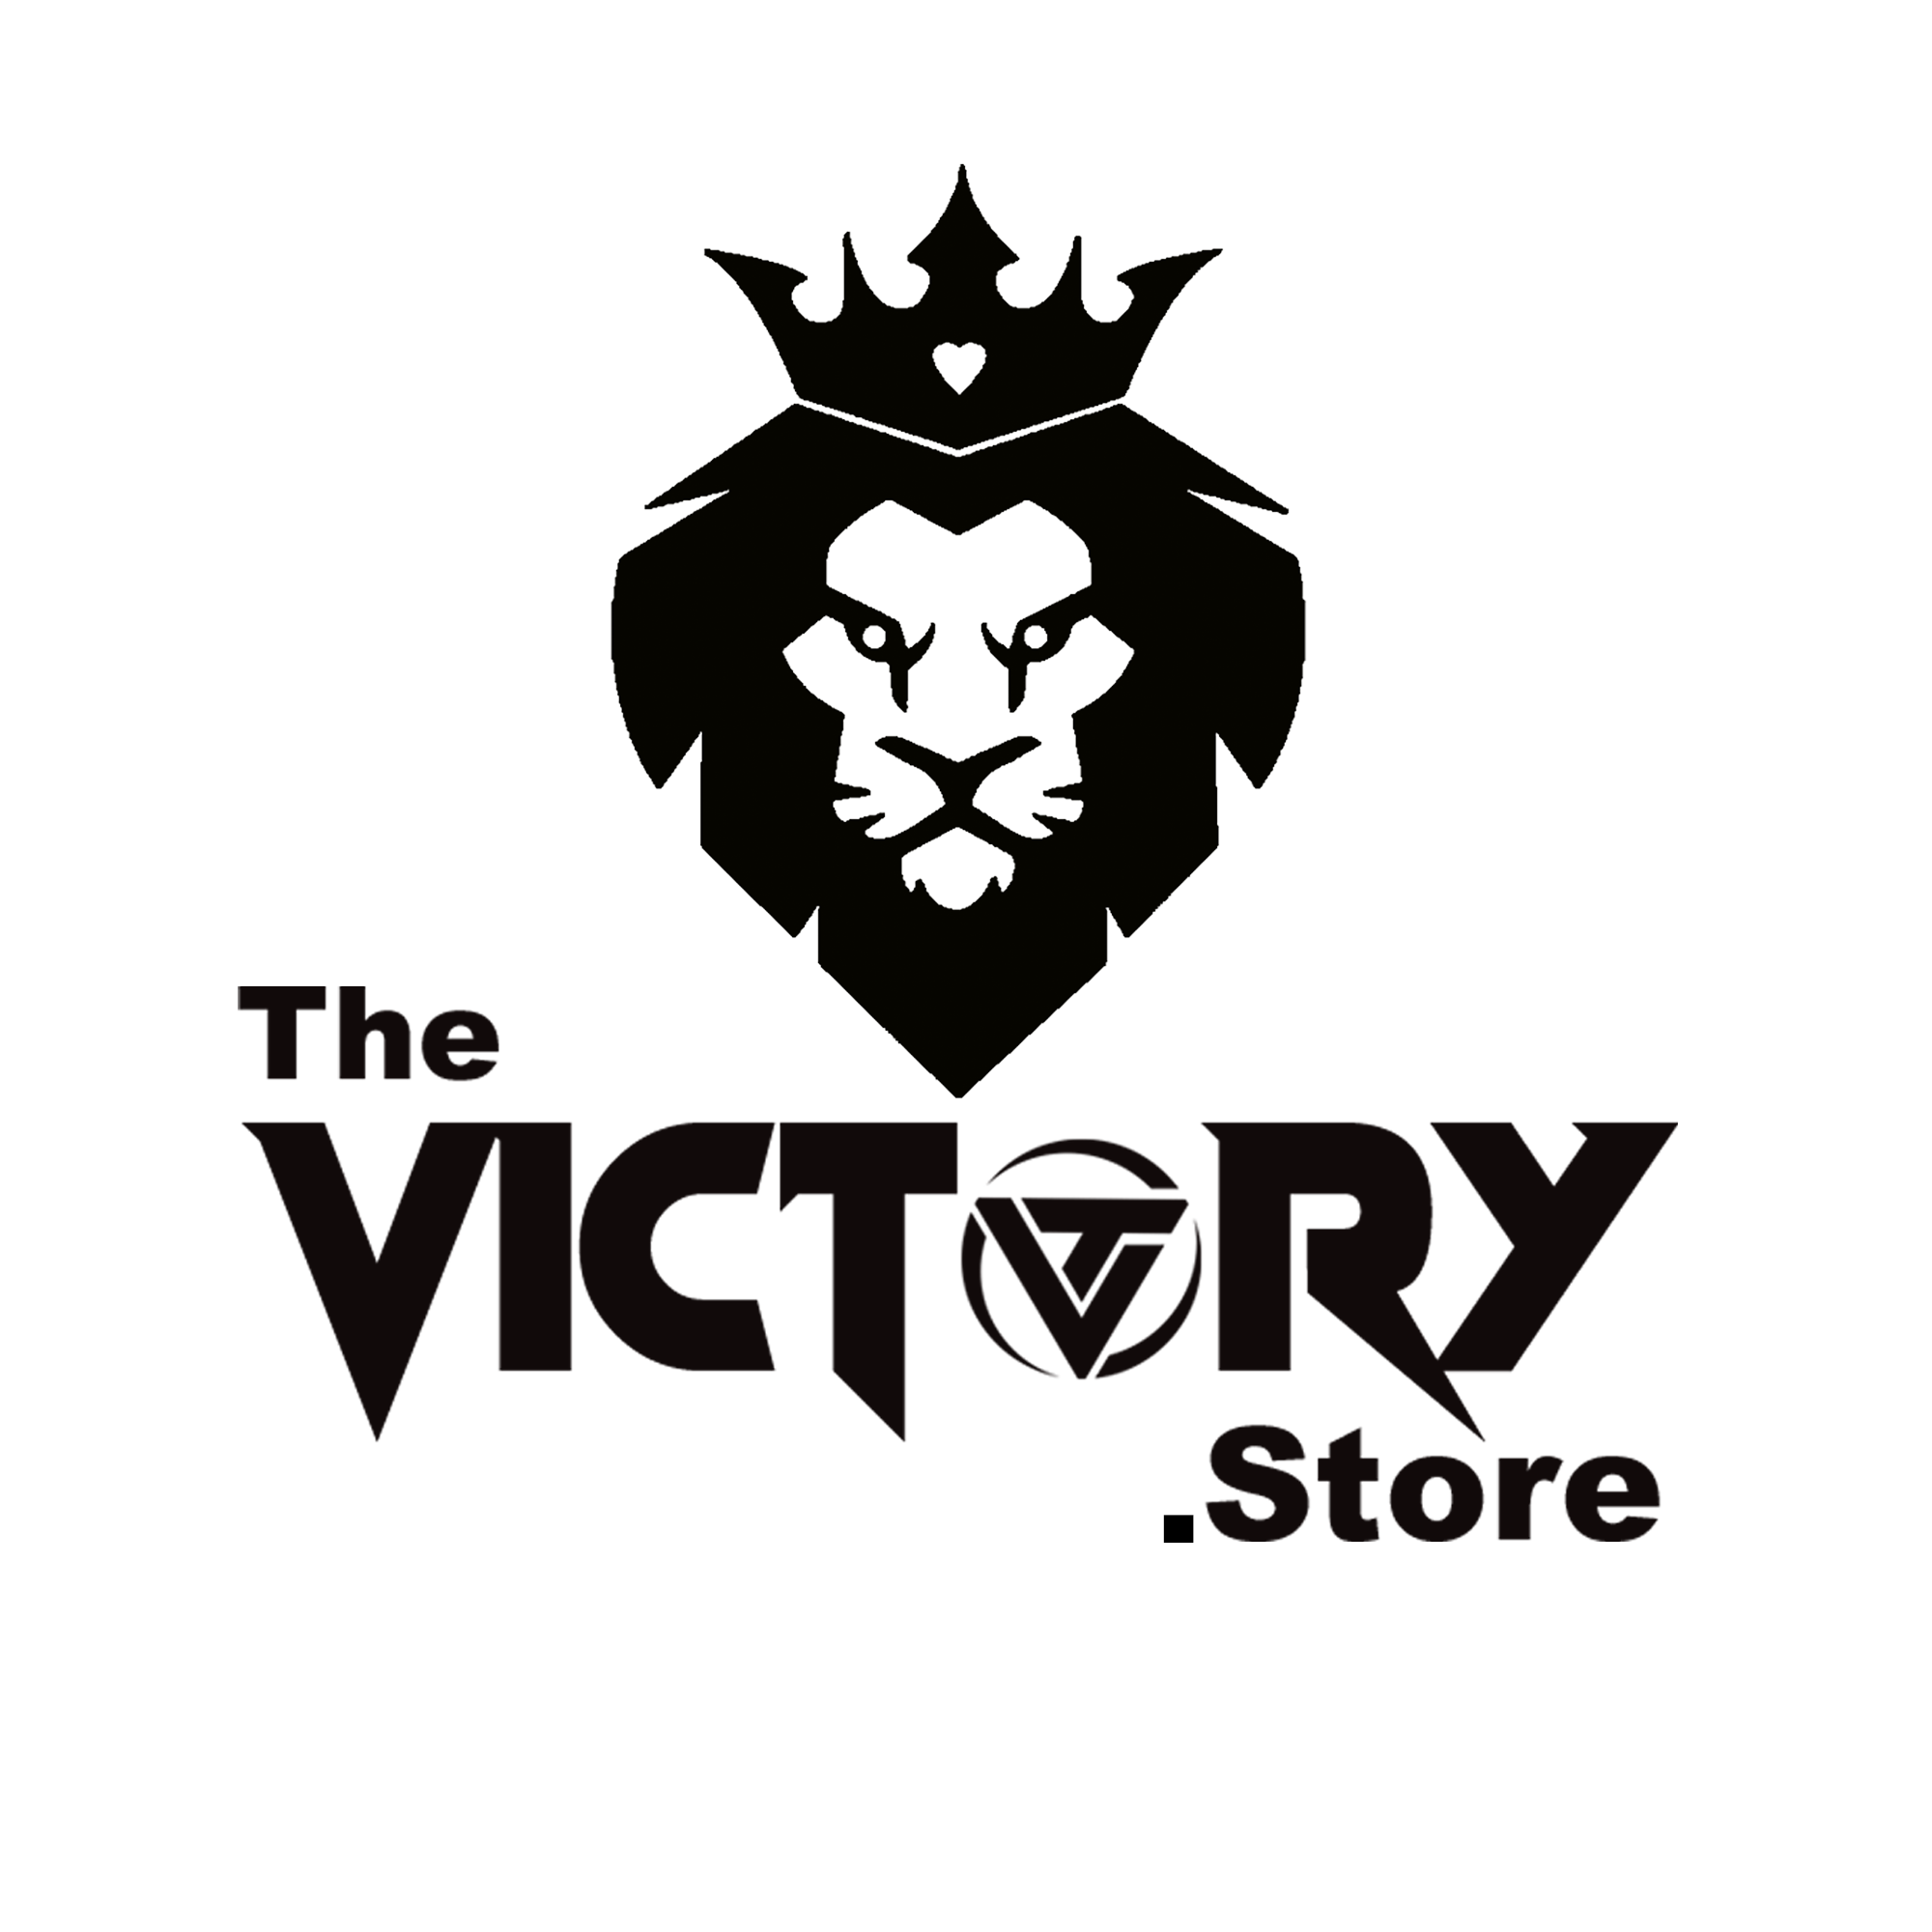 The Victory Store